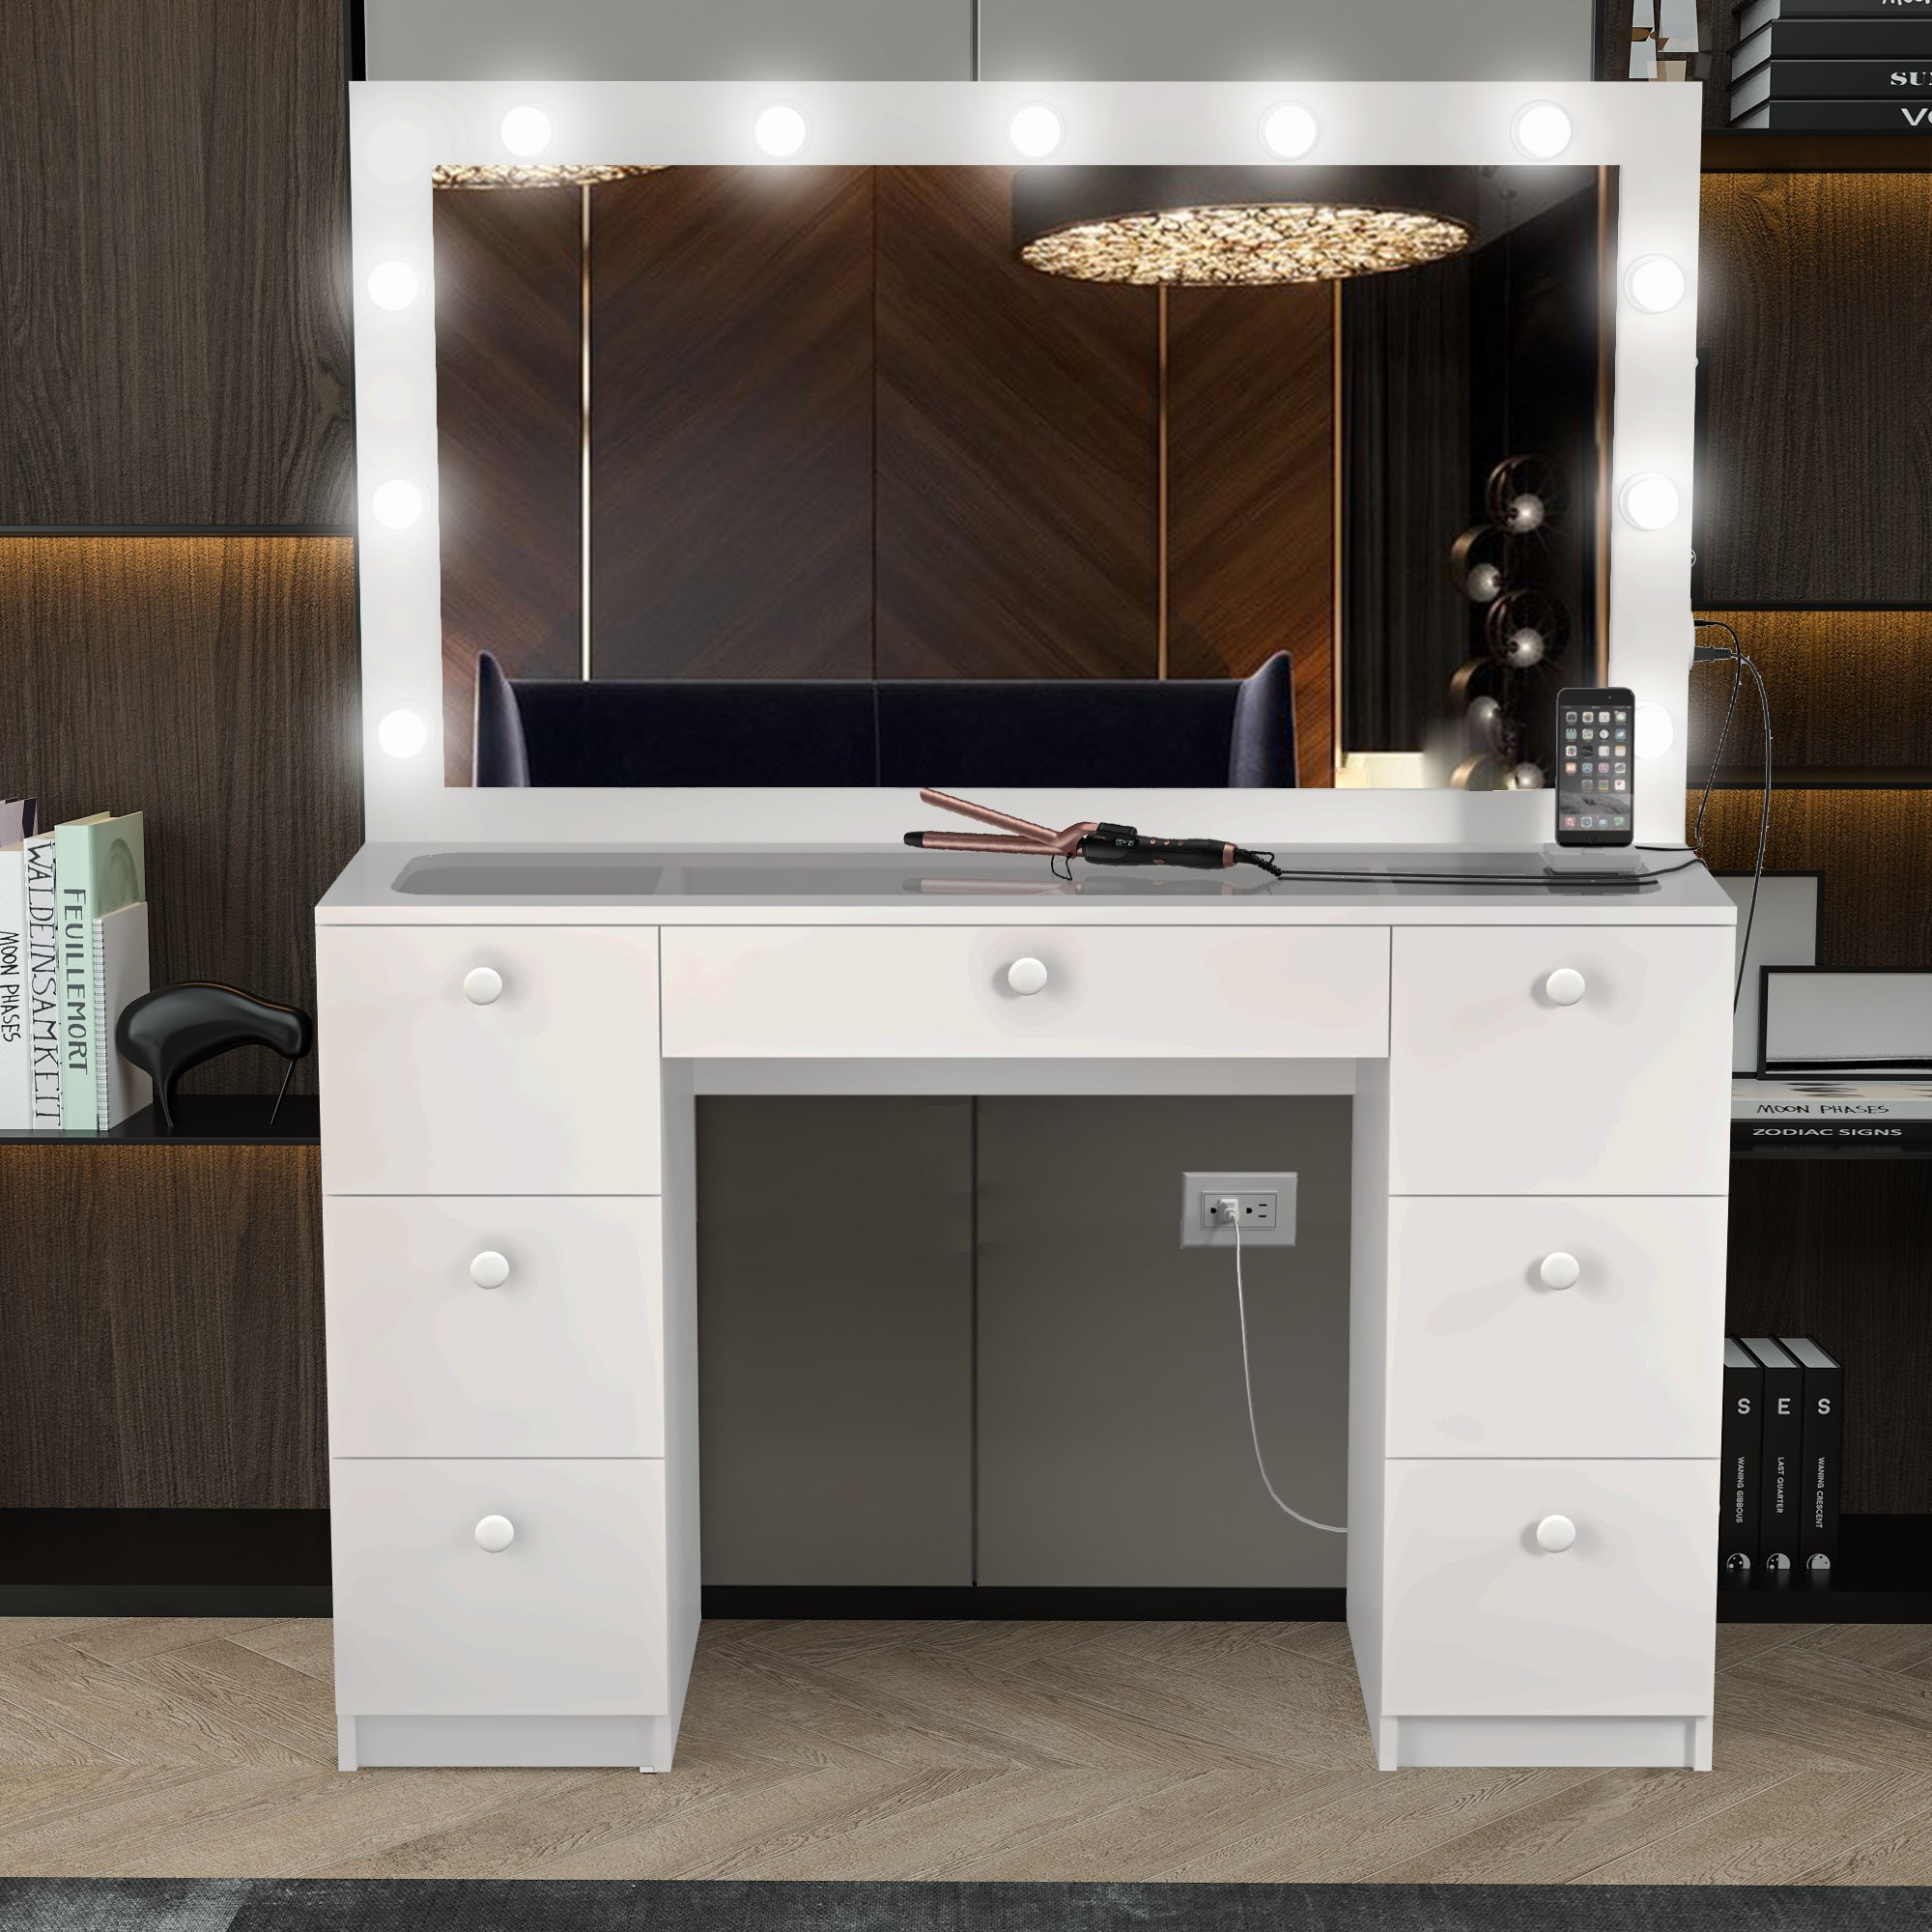 Boahaus Yara Vanity Makeup Desk with Frameless Hollywood Vanity Mirror,  Lights, 7 Drawers, Non- Glass Top, White Makeup Table with Basic Knobs for  Bedroom 